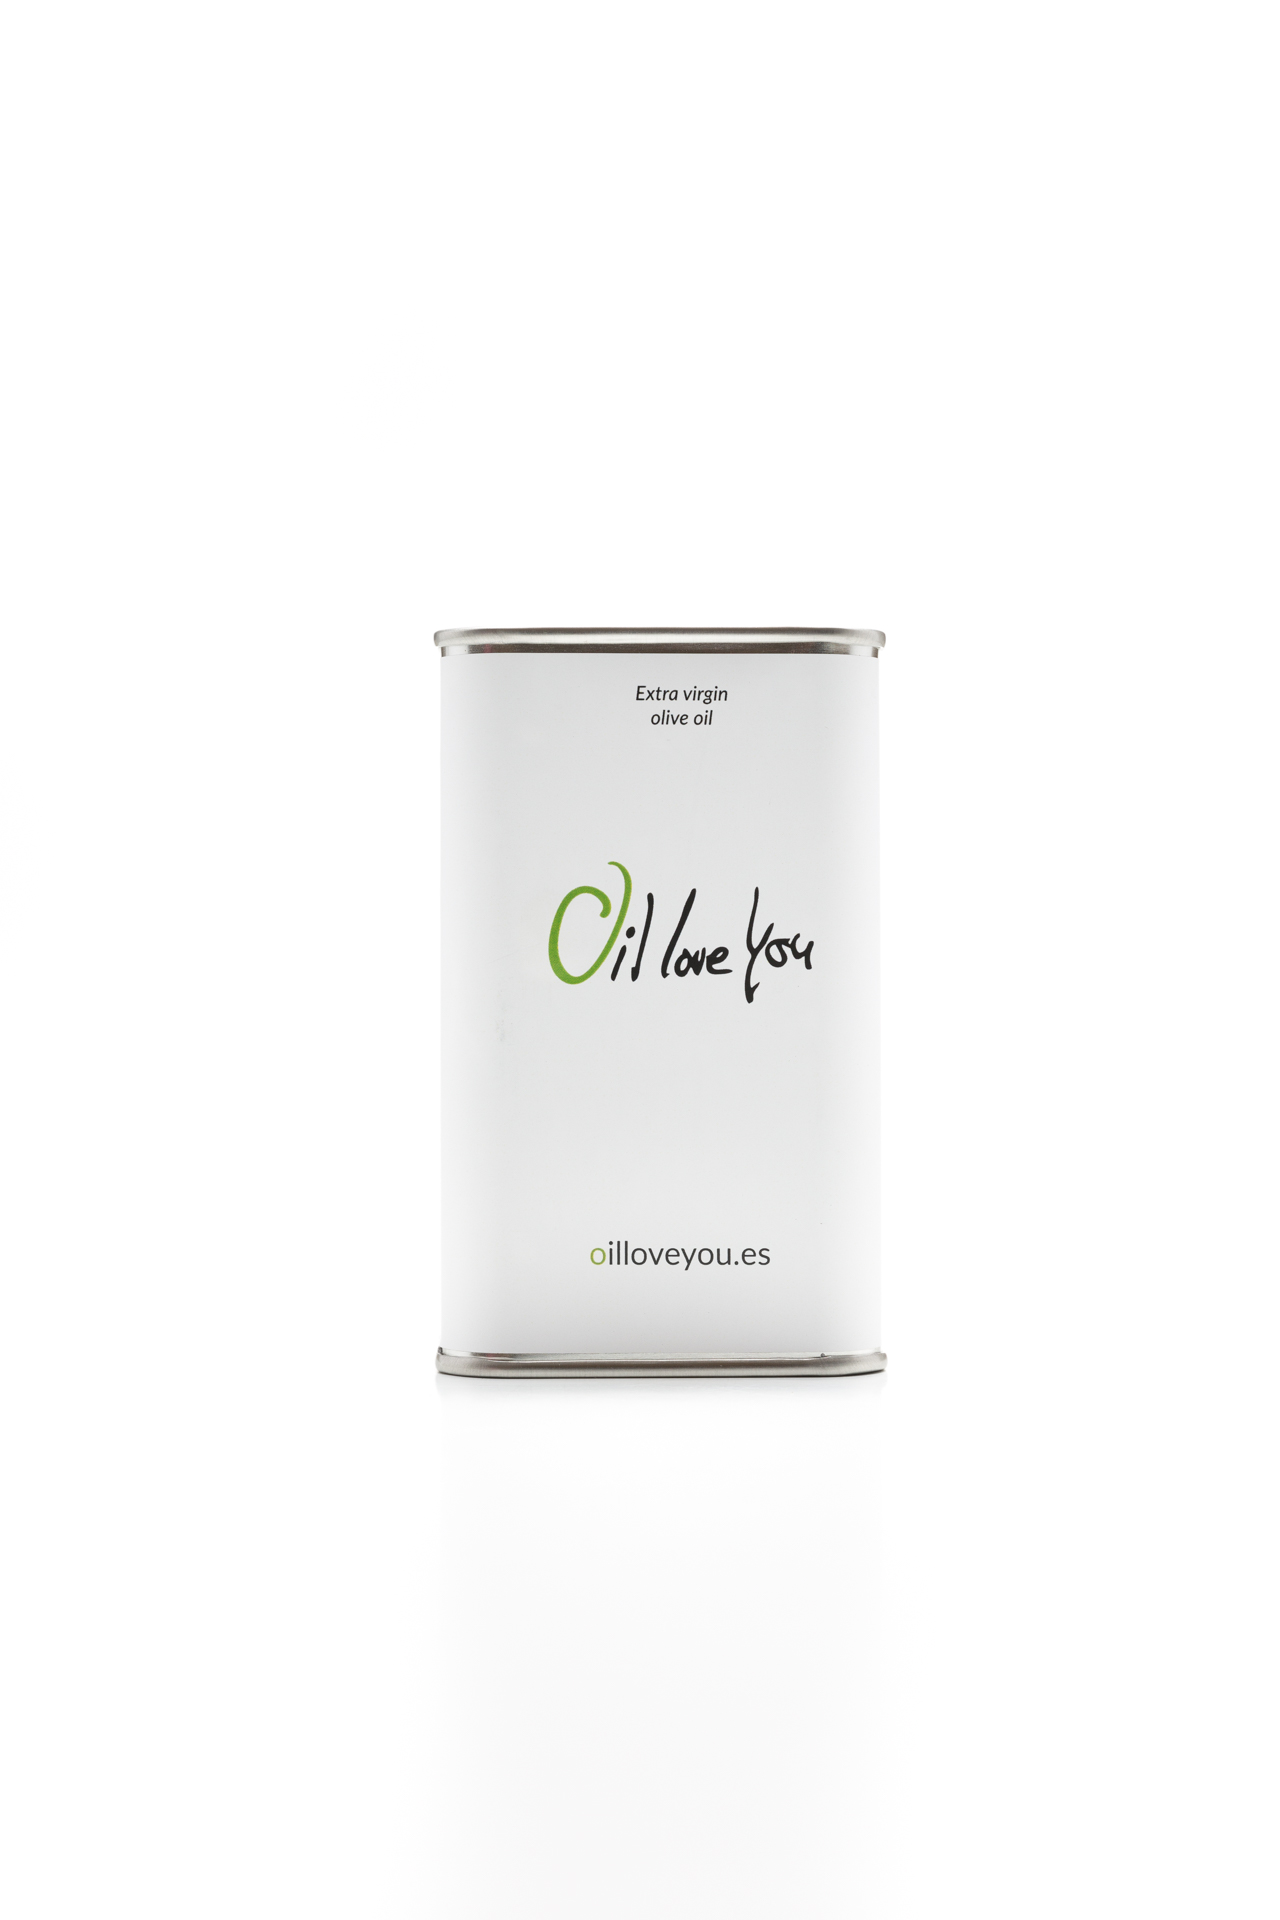 Can of EVOO Oil Love You 250 ml oilloveyou (3)